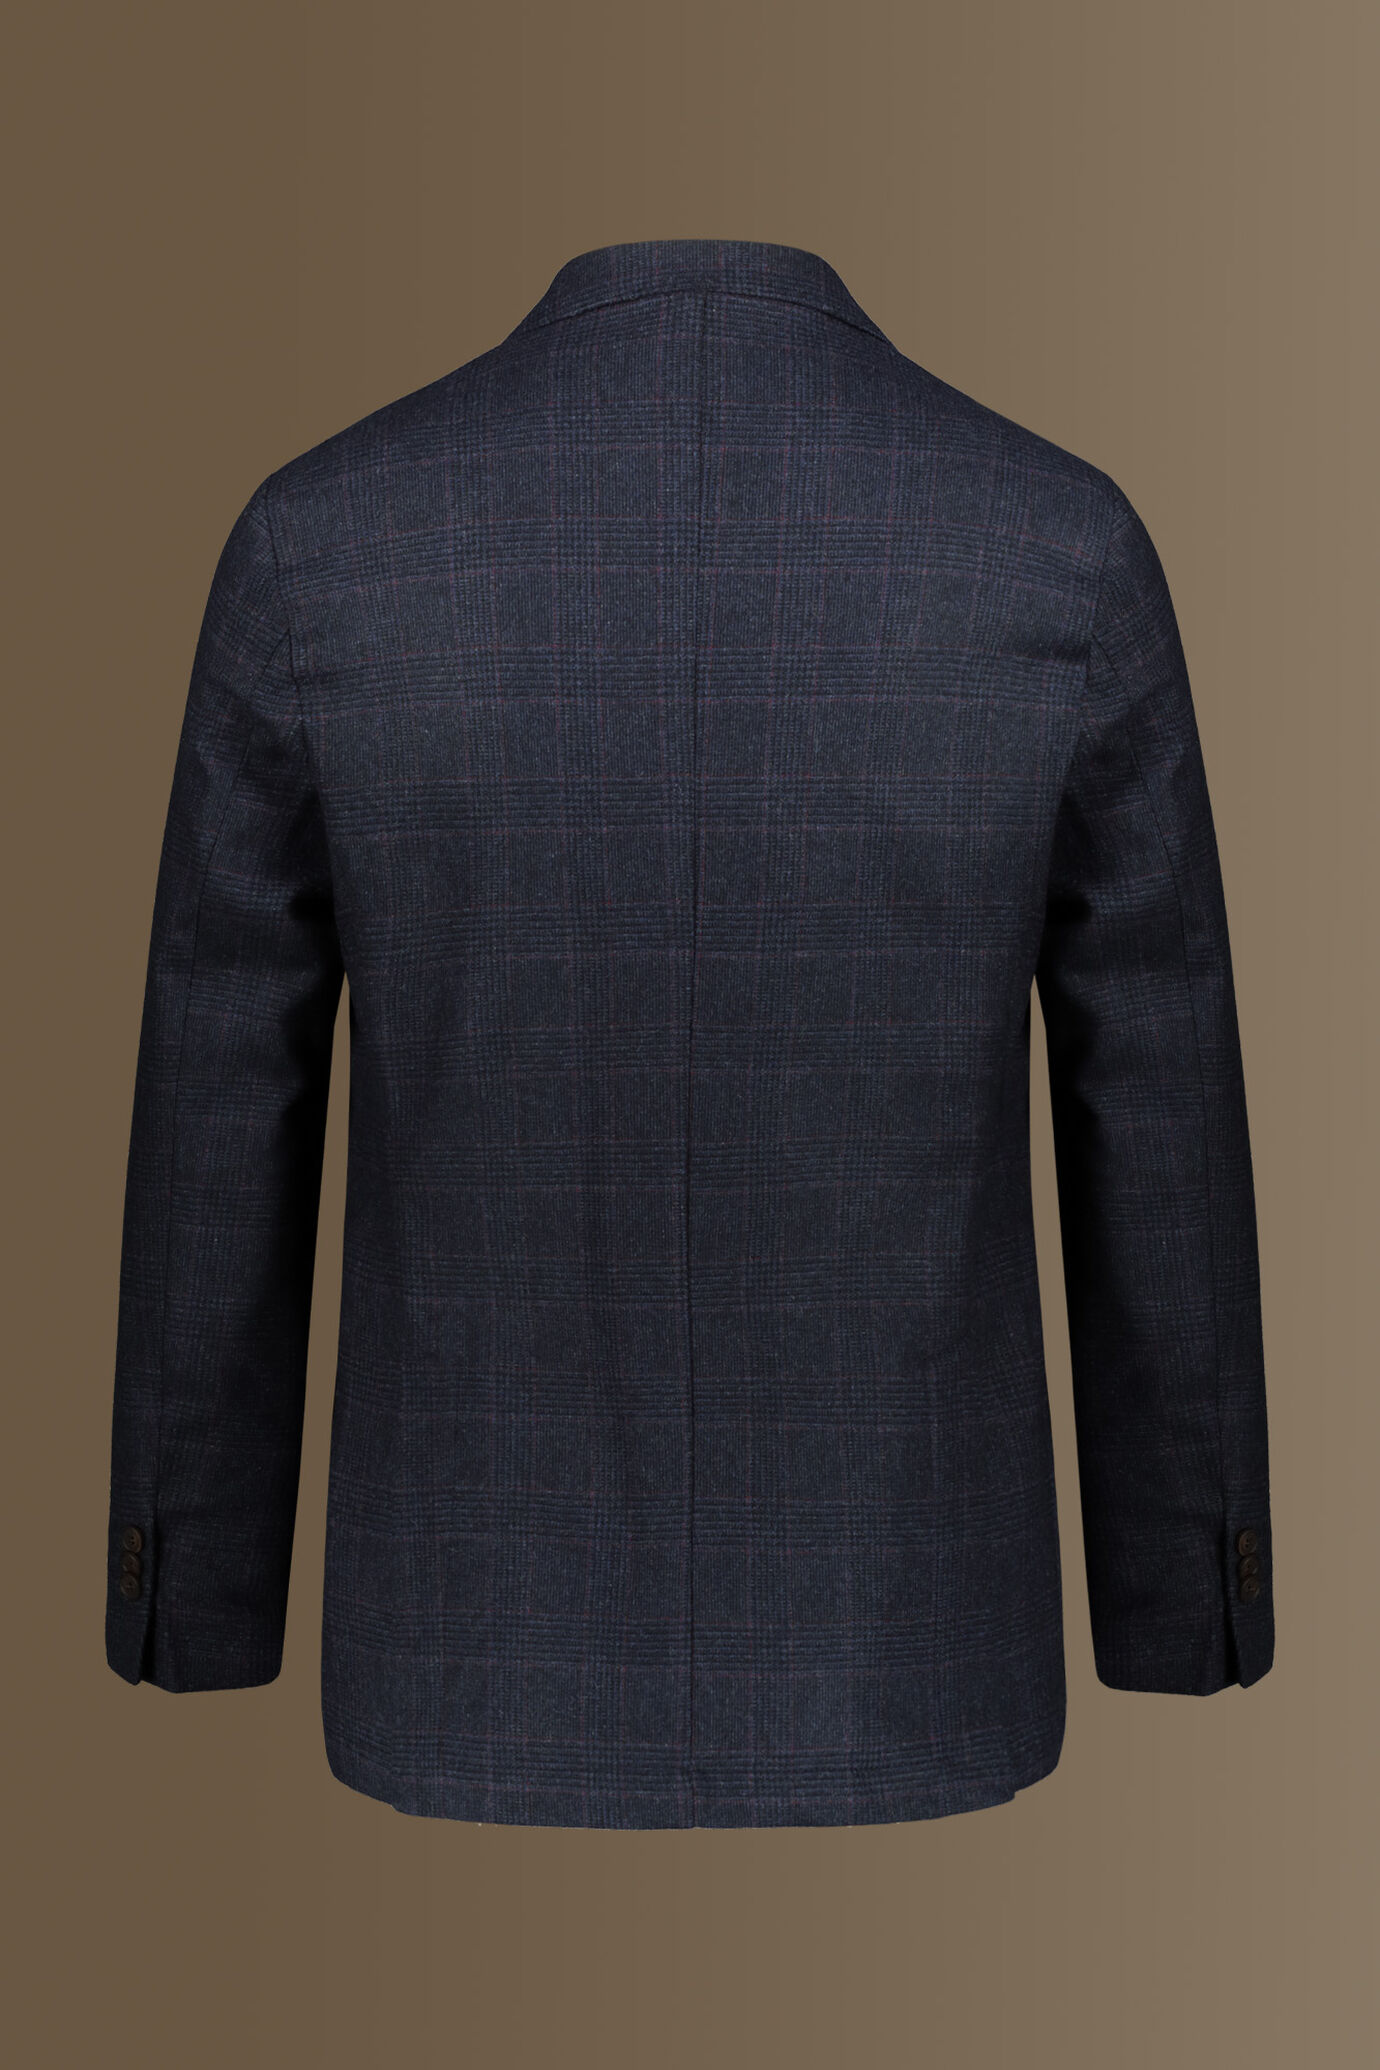 Single breasted Jaket, wool blend, fheck design. Made in italy image number 1